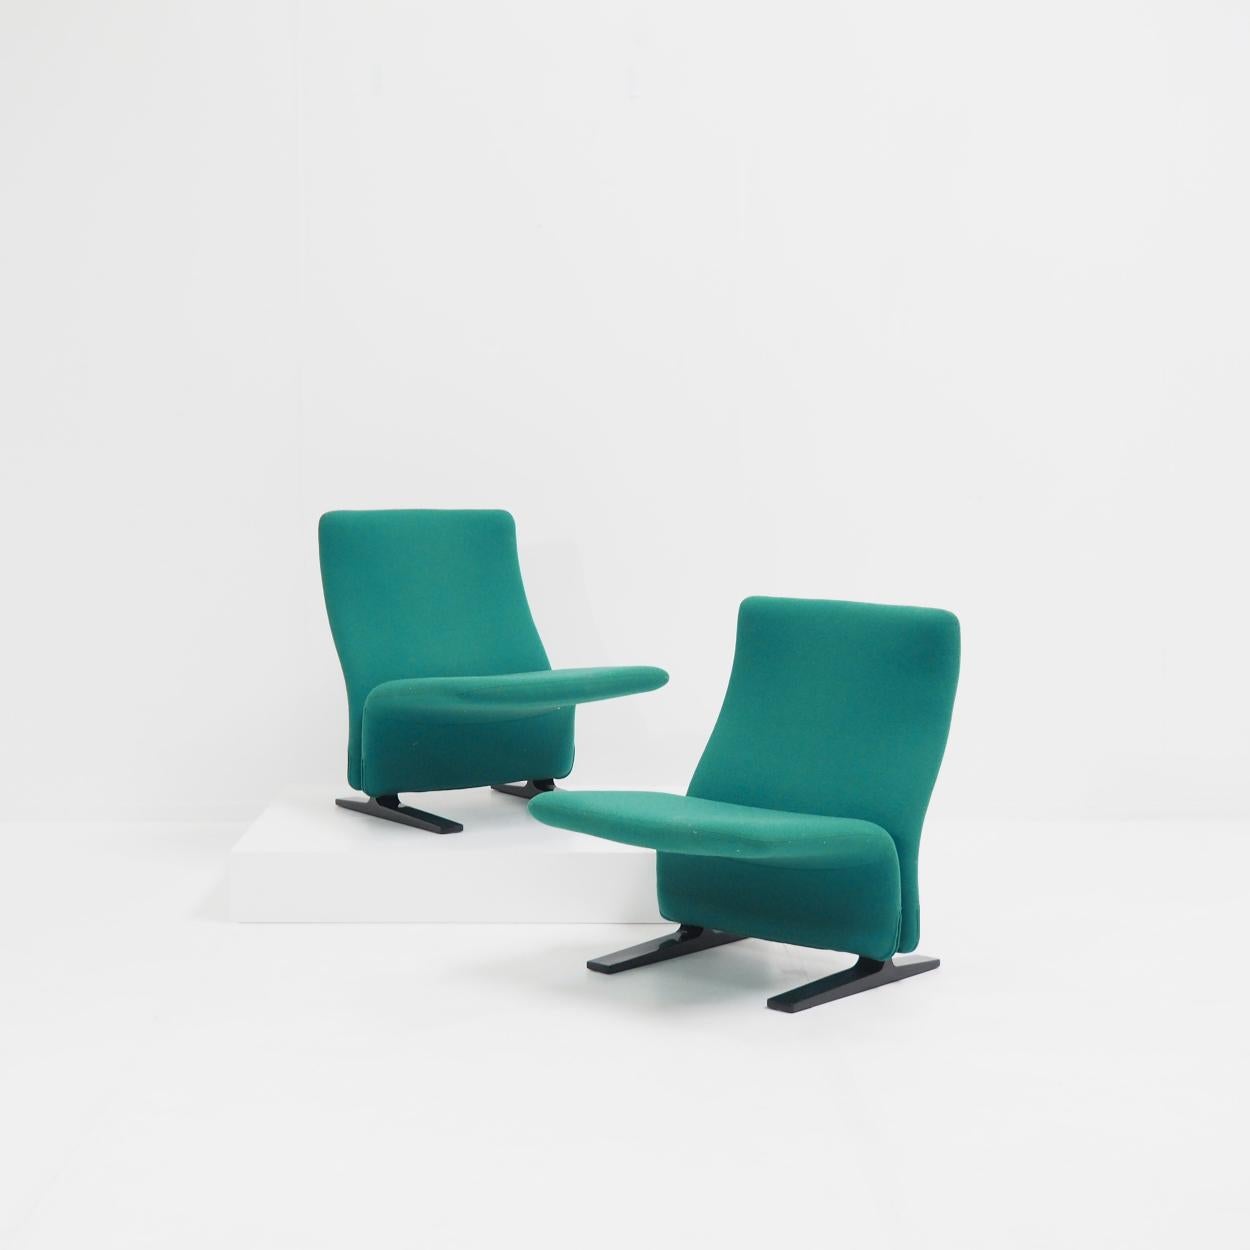 Set of F-780 “Concorde” Chairs by Pierre Paulin for Artifort 1